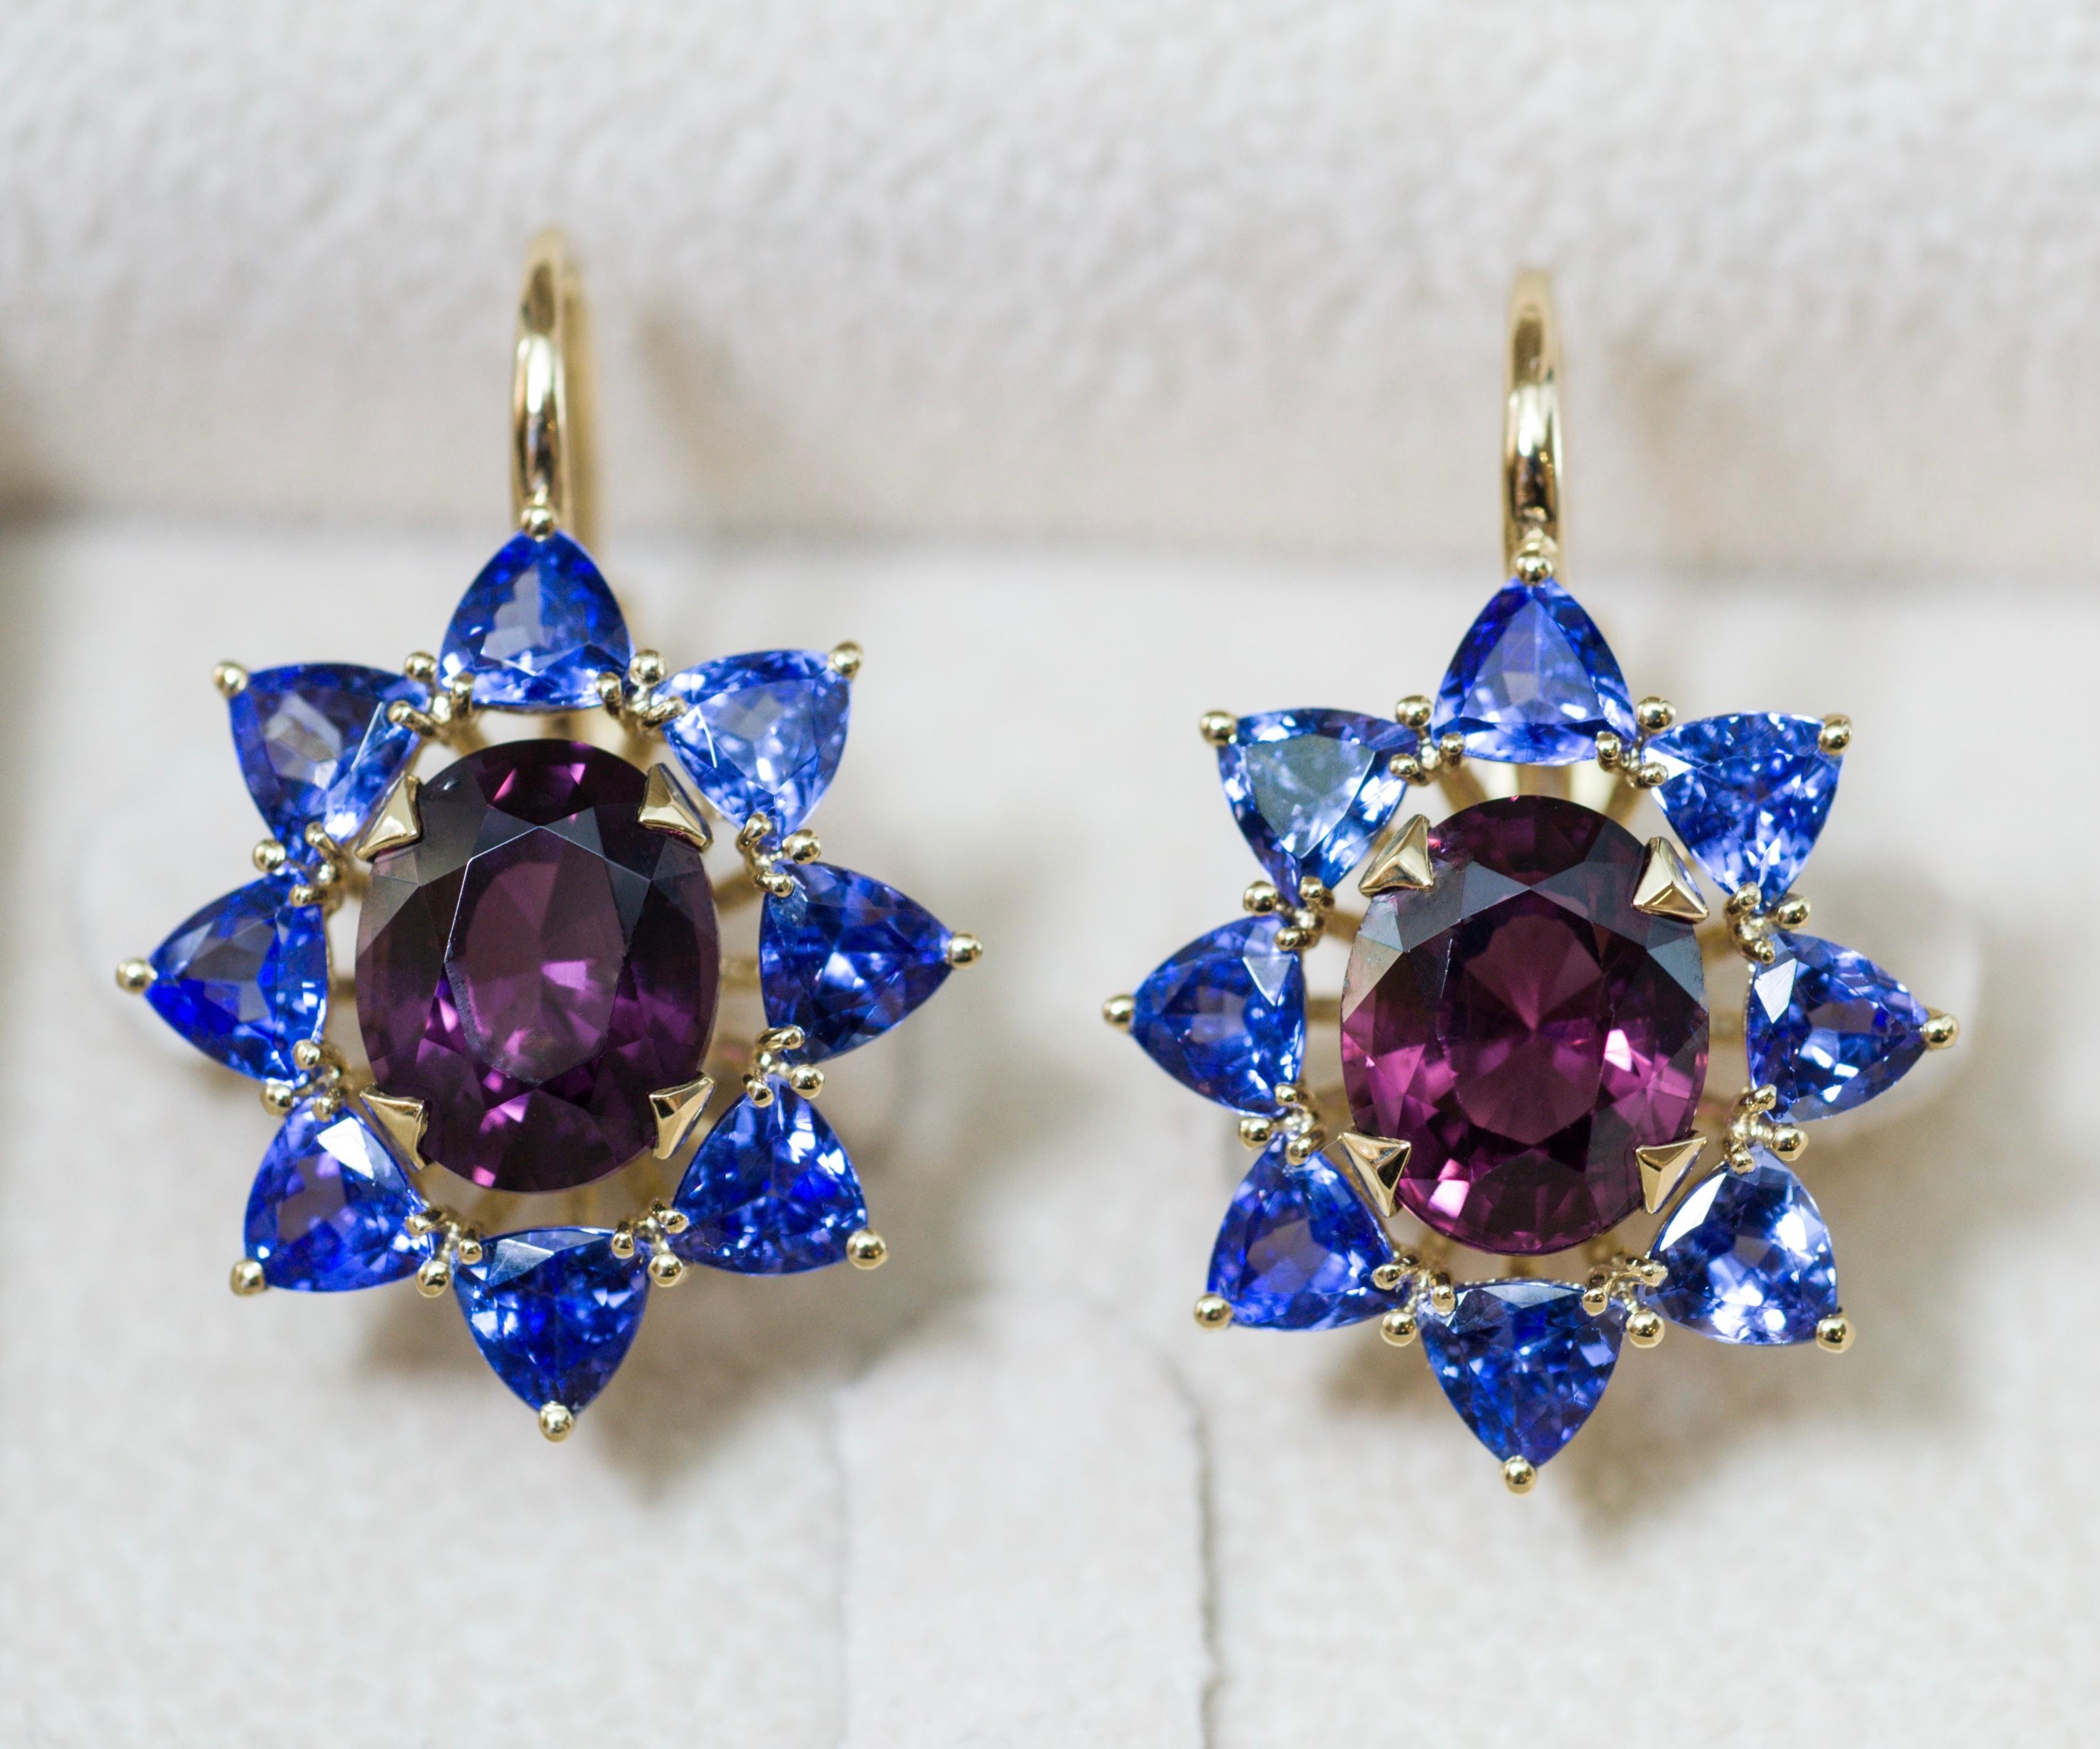 If you like unusial jewelry than this earrings are made specially for you.
Here we can see amazing and harmonious color combination: bordo Spinel in reach cherry color and beautiful violet eye clean Tanzanites in trillion shape.
18 Karat yellow gold